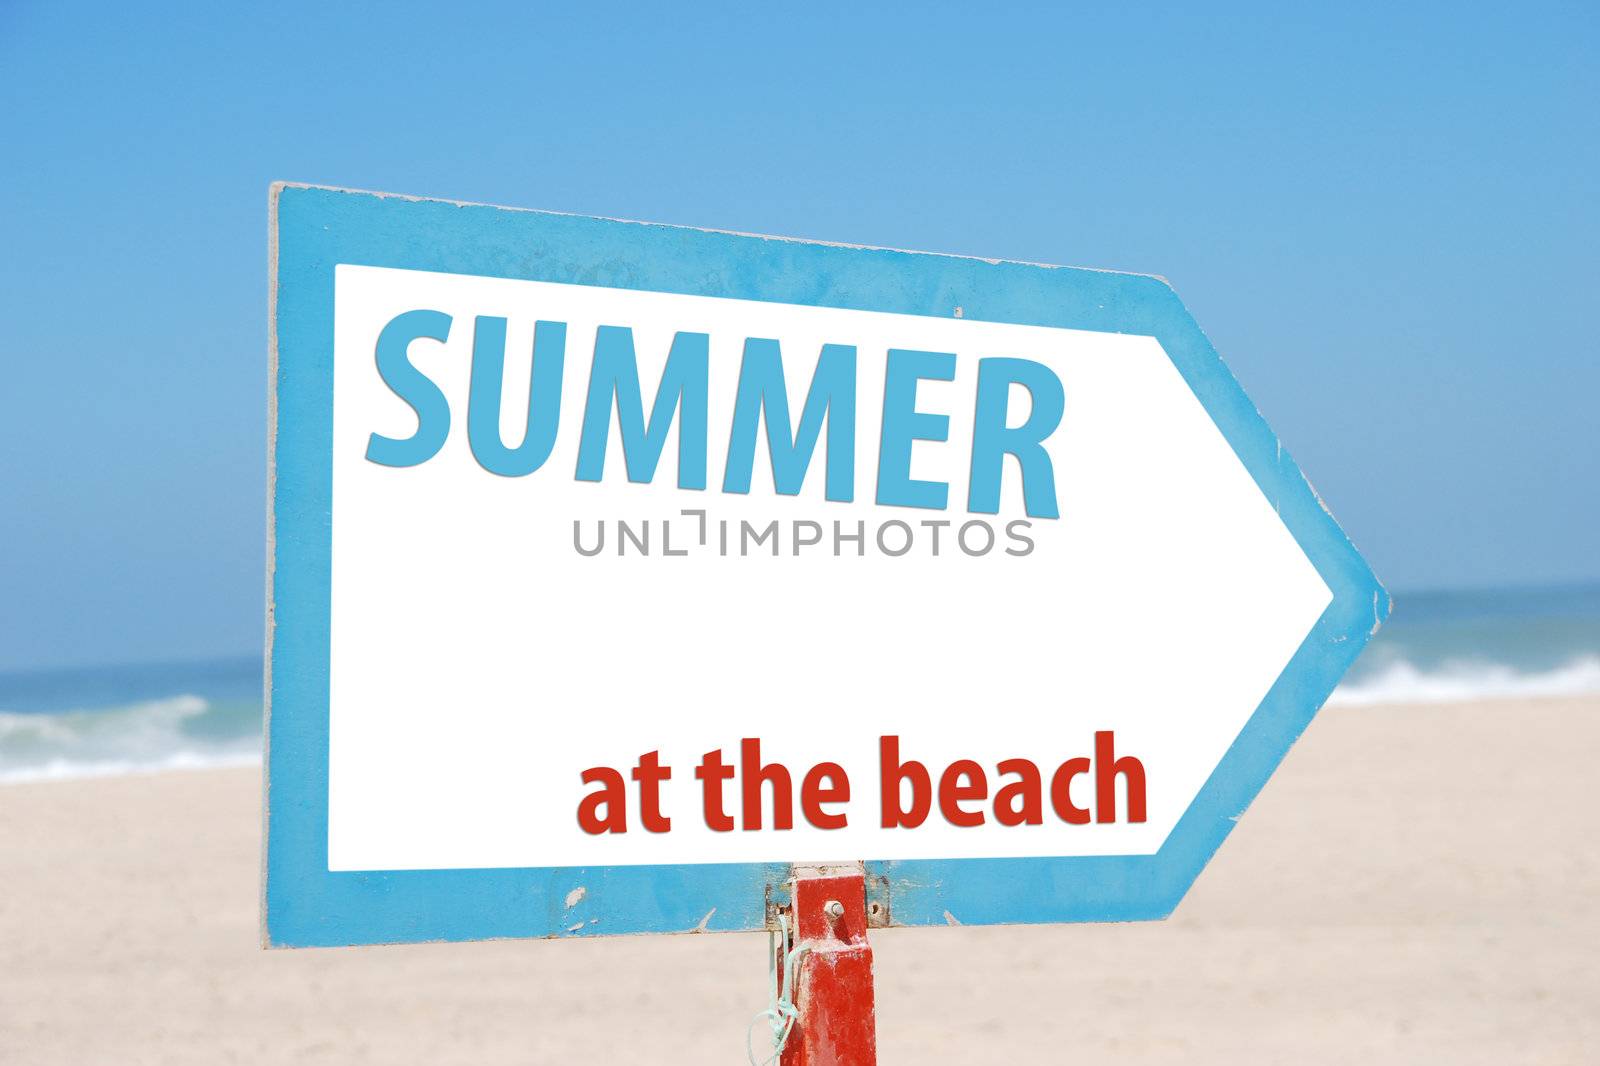 conceptual picture with summer at the beach sign against a blue sky and sandy beach